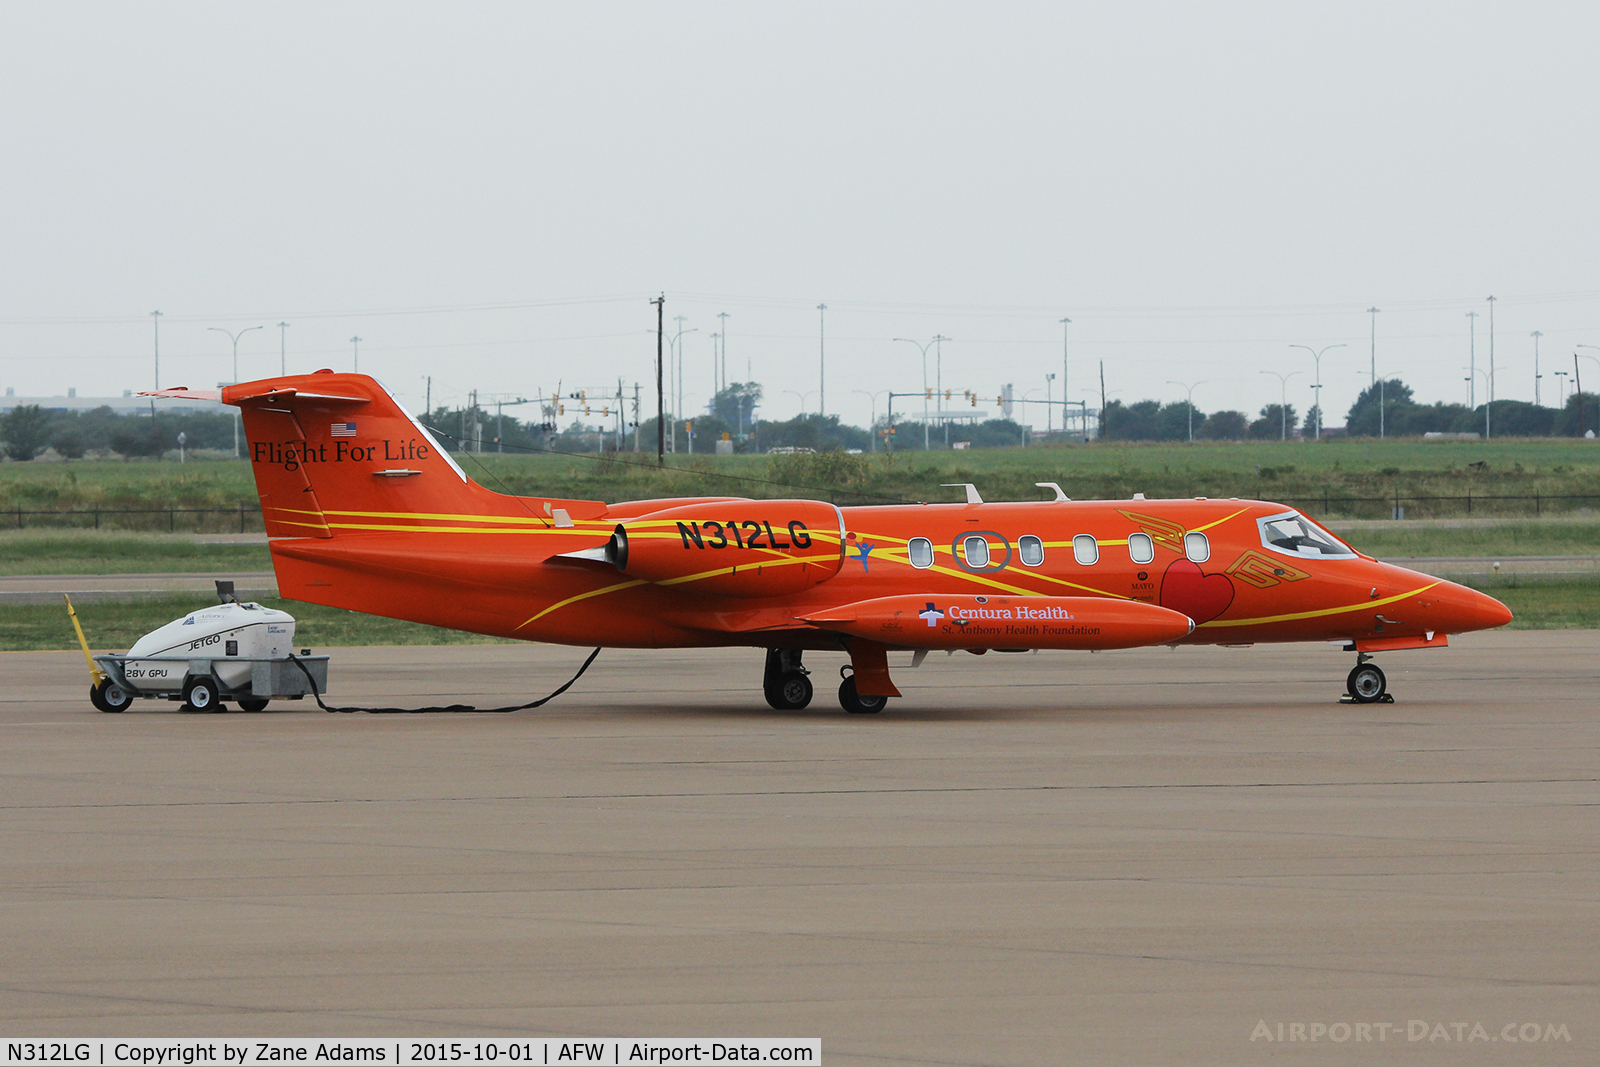 N312LG, 1982 Gates Learjet 35A C/N 35-489, At Alliance Airport - Fort Worth,TX